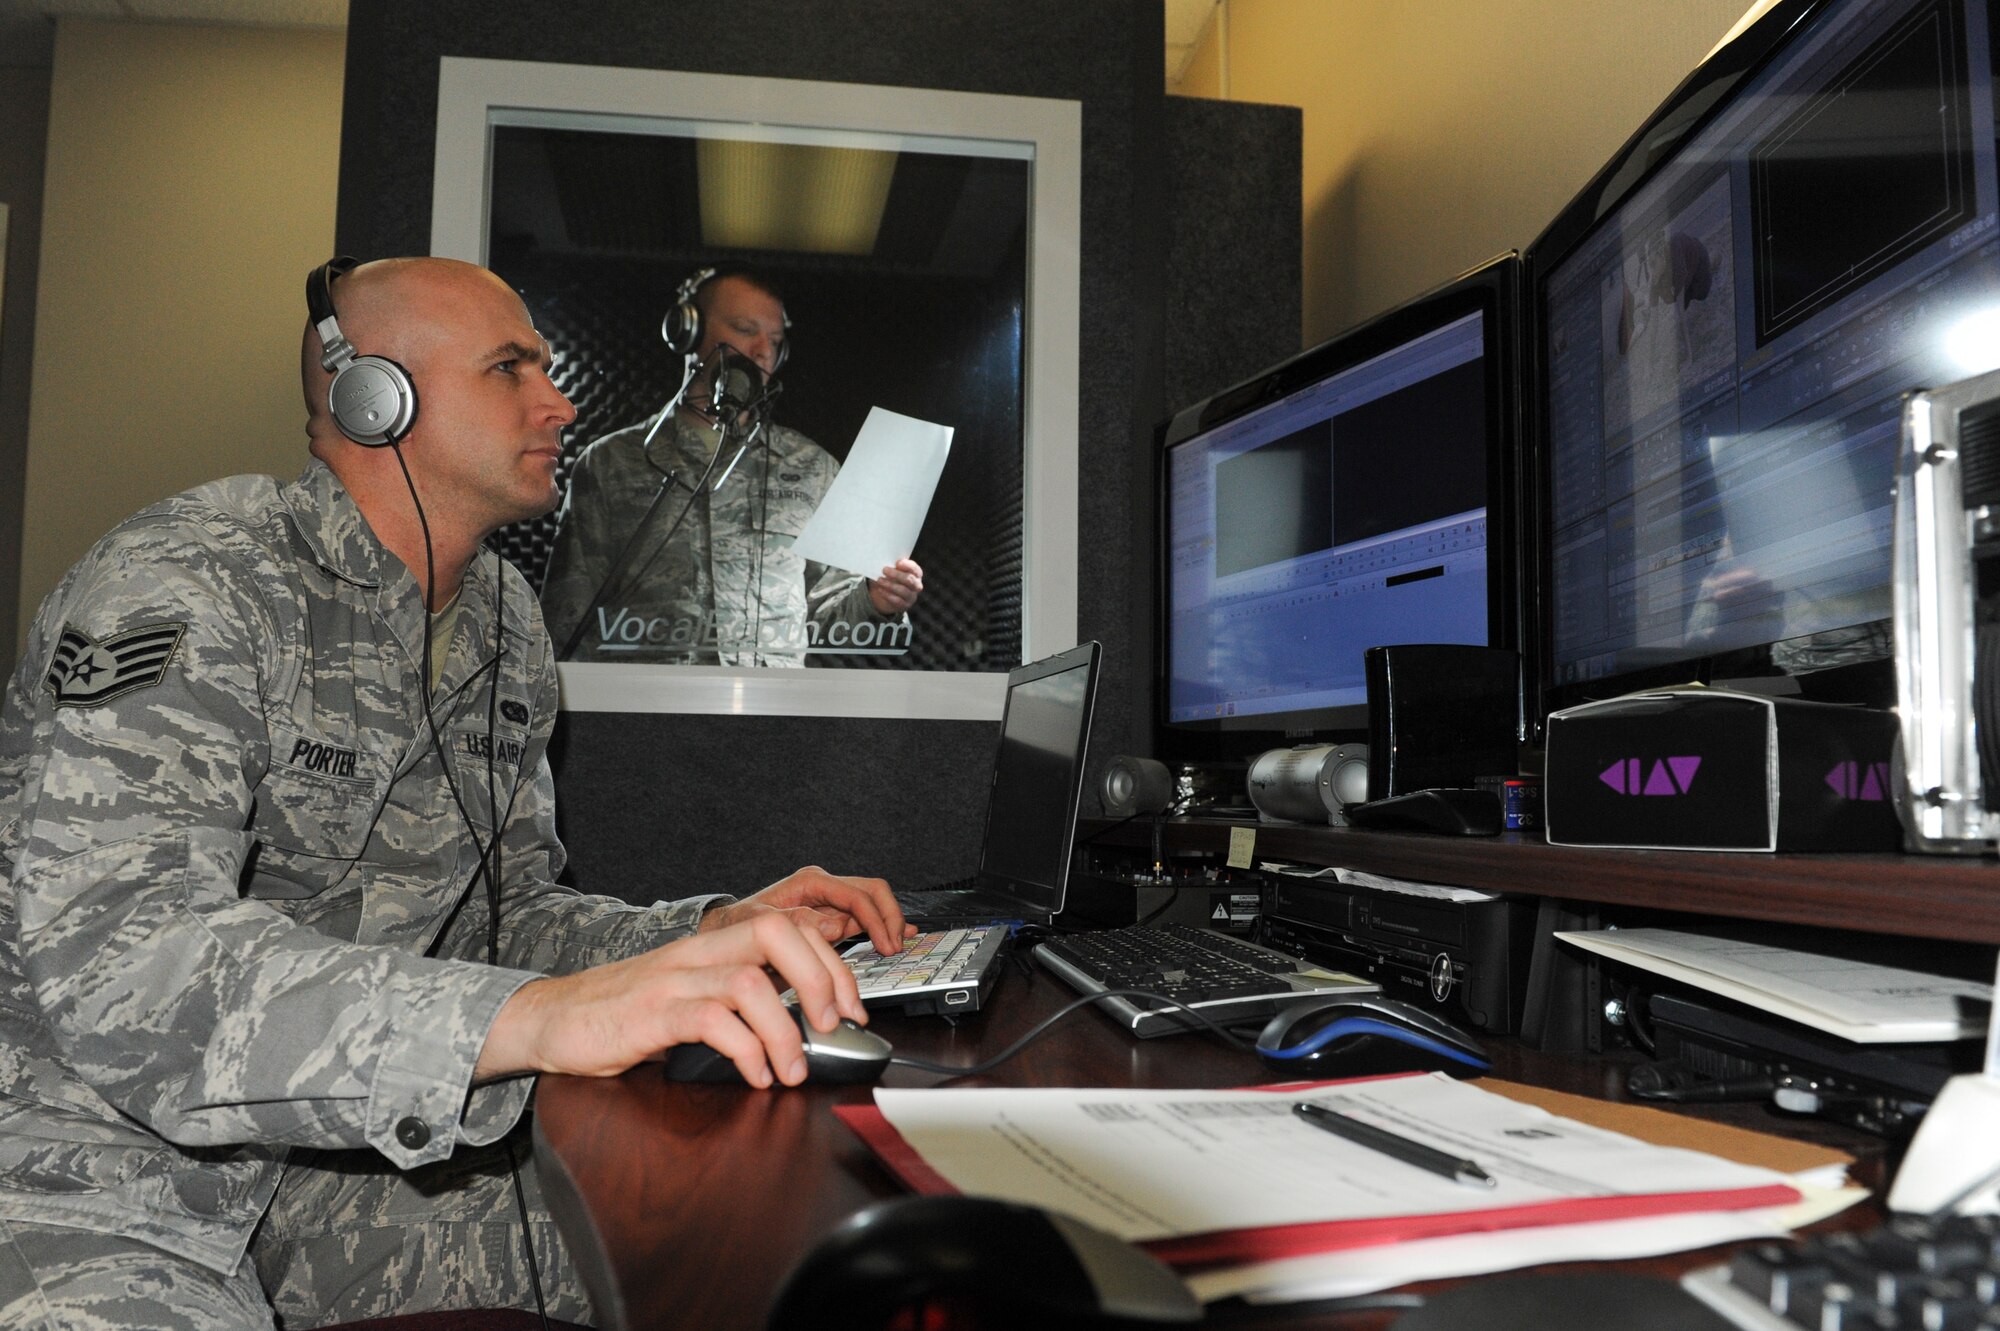 Staff Sgt. Jon Porter and Airman 1st Class Steven Adkins, 19th Airlift Wing public affairs broadcasters, utilize the soundproof vocal booth to record a voice-over Feb. 25, 2013, at Little Rock Air Force Base, Ark. Porter and Adkins create news stories and video projects for base units and agencies. (U.S. Air Force photo by Senior Airman Rusty Frank)